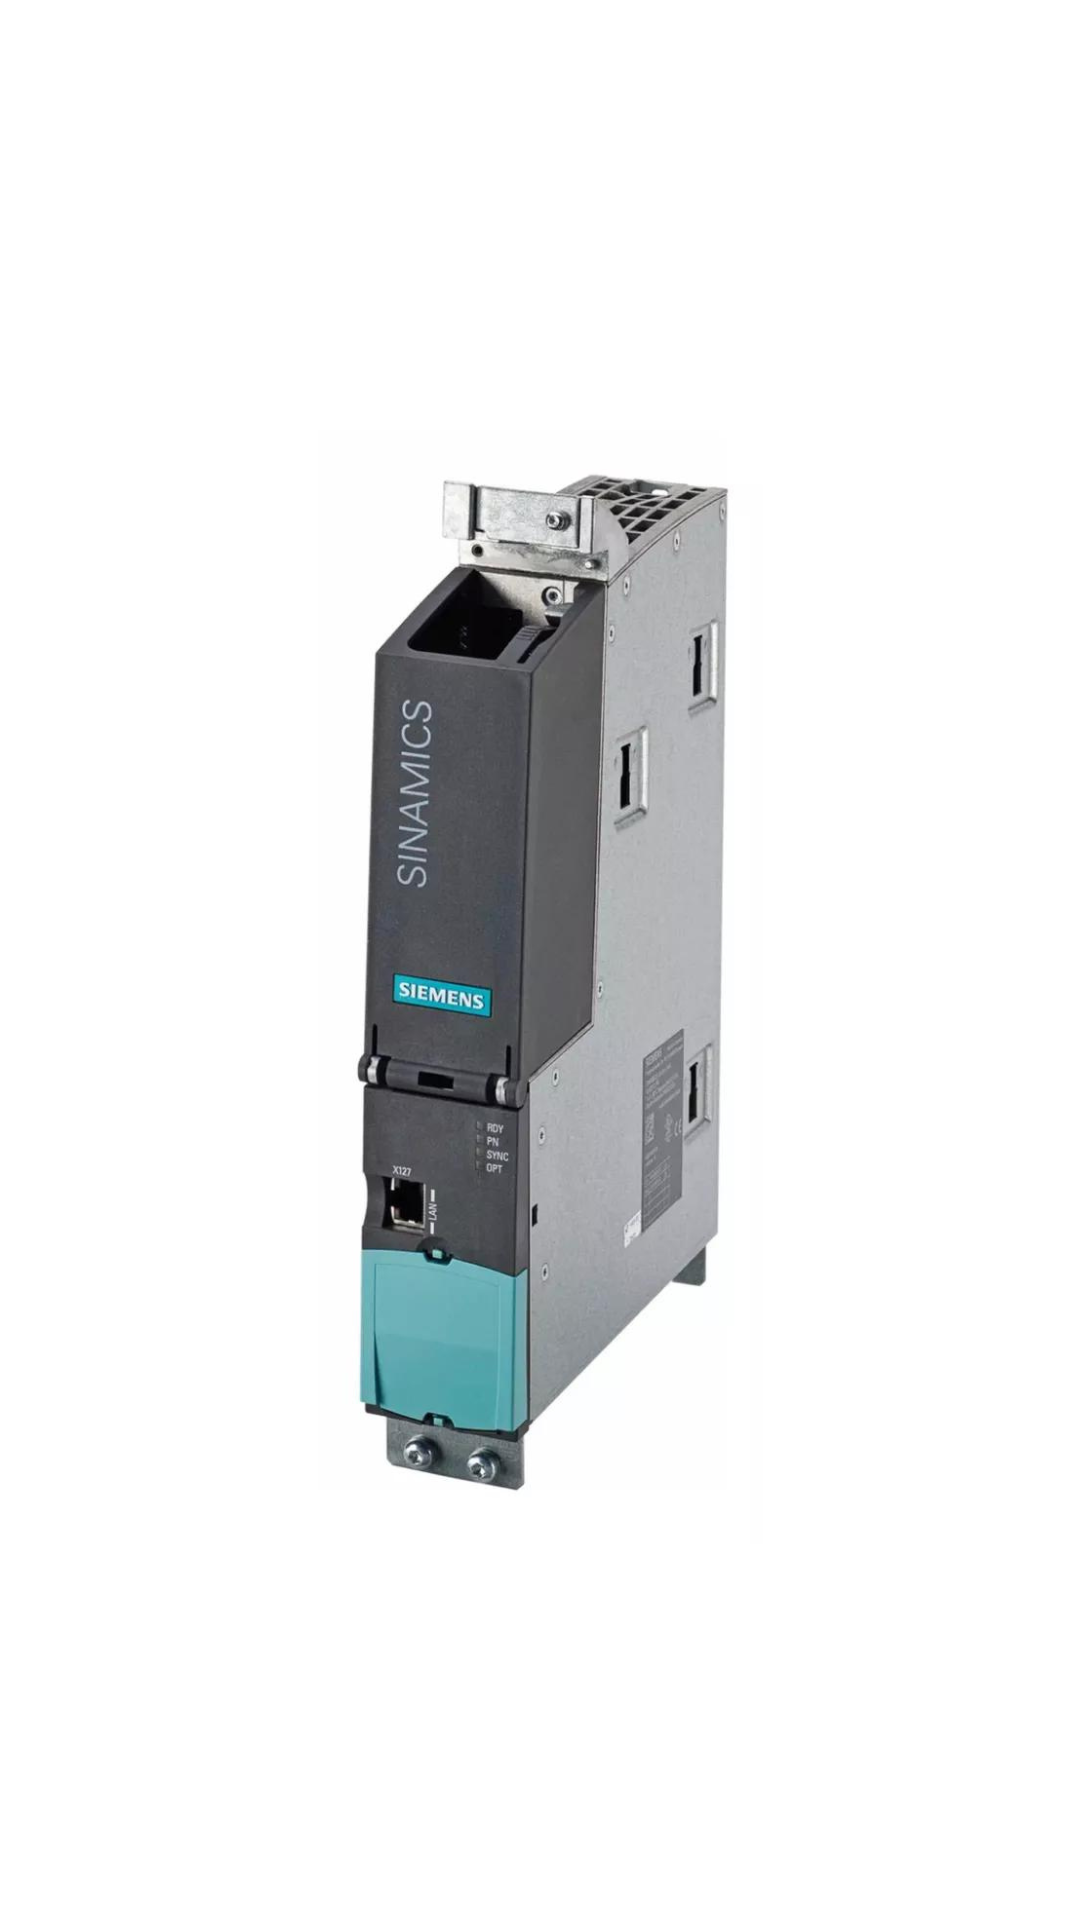 6SL3120-1TE21-0AD0 Siemens SINAMICS S120 SINGLE MOTOR MODULE INPUT: DC 600V OUTPUT: 3-PH 400V, 9A FRAME SIZE: BOOKSIZE D-TYPE INTERNAL AIR COOLING OPTIMIZED PULSE SAMPLE AND SUPPORT OF THE EXTENDED SAFETY INTEGRATED FUNCTIONS INCL. DRIVE-CLIQ CABLE